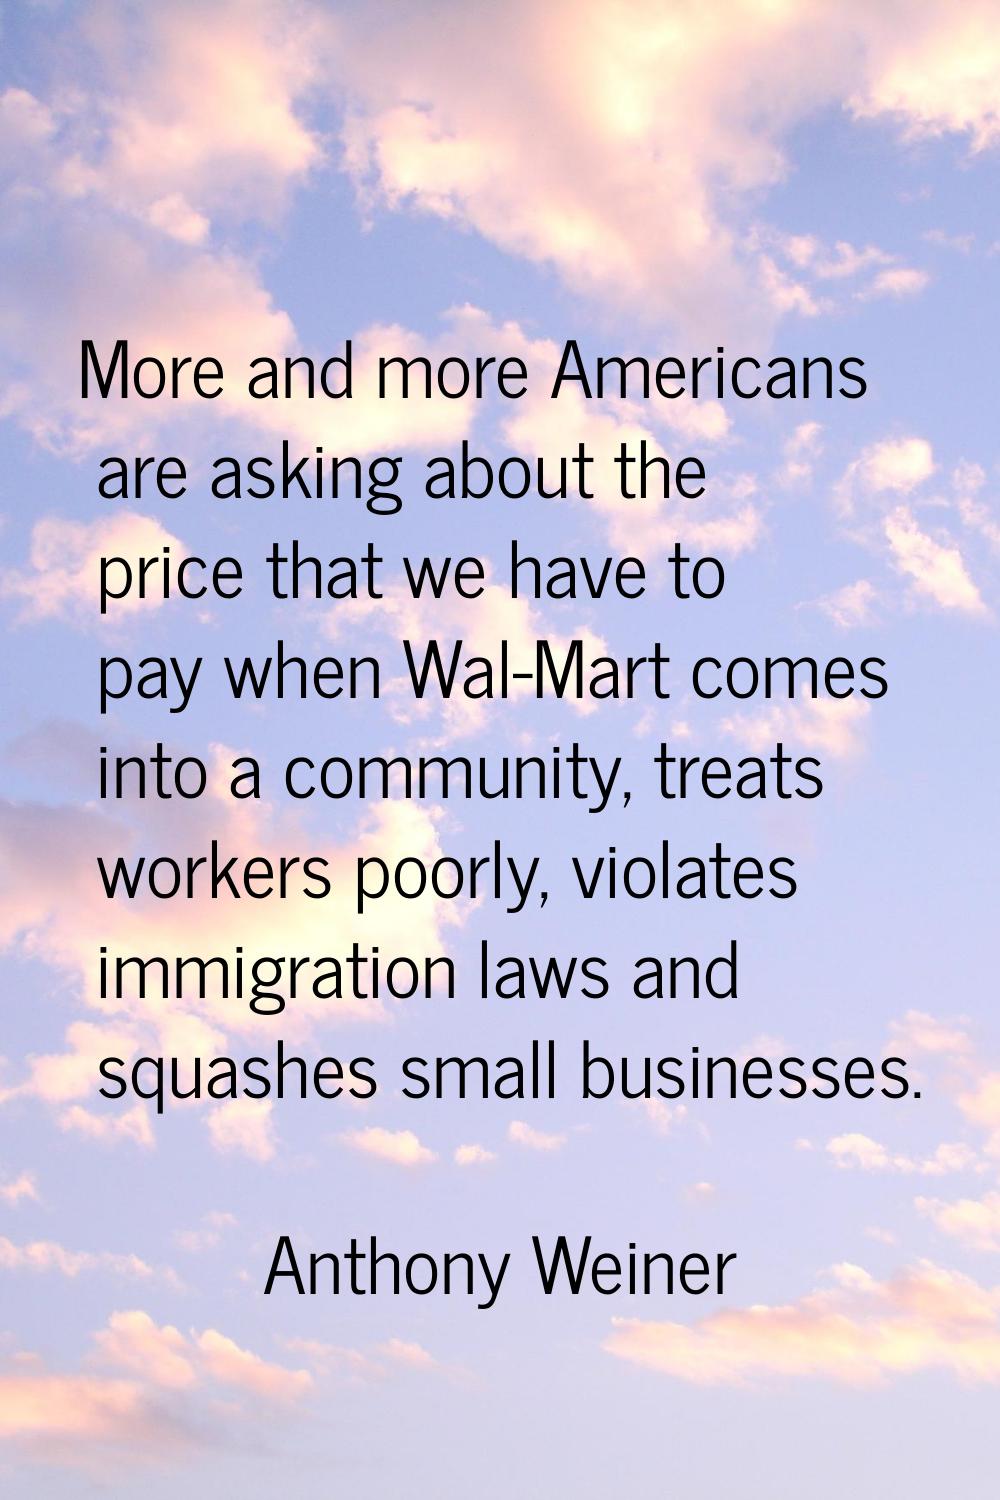 More and more Americans are asking about the price that we have to pay when Wal-Mart comes into a c